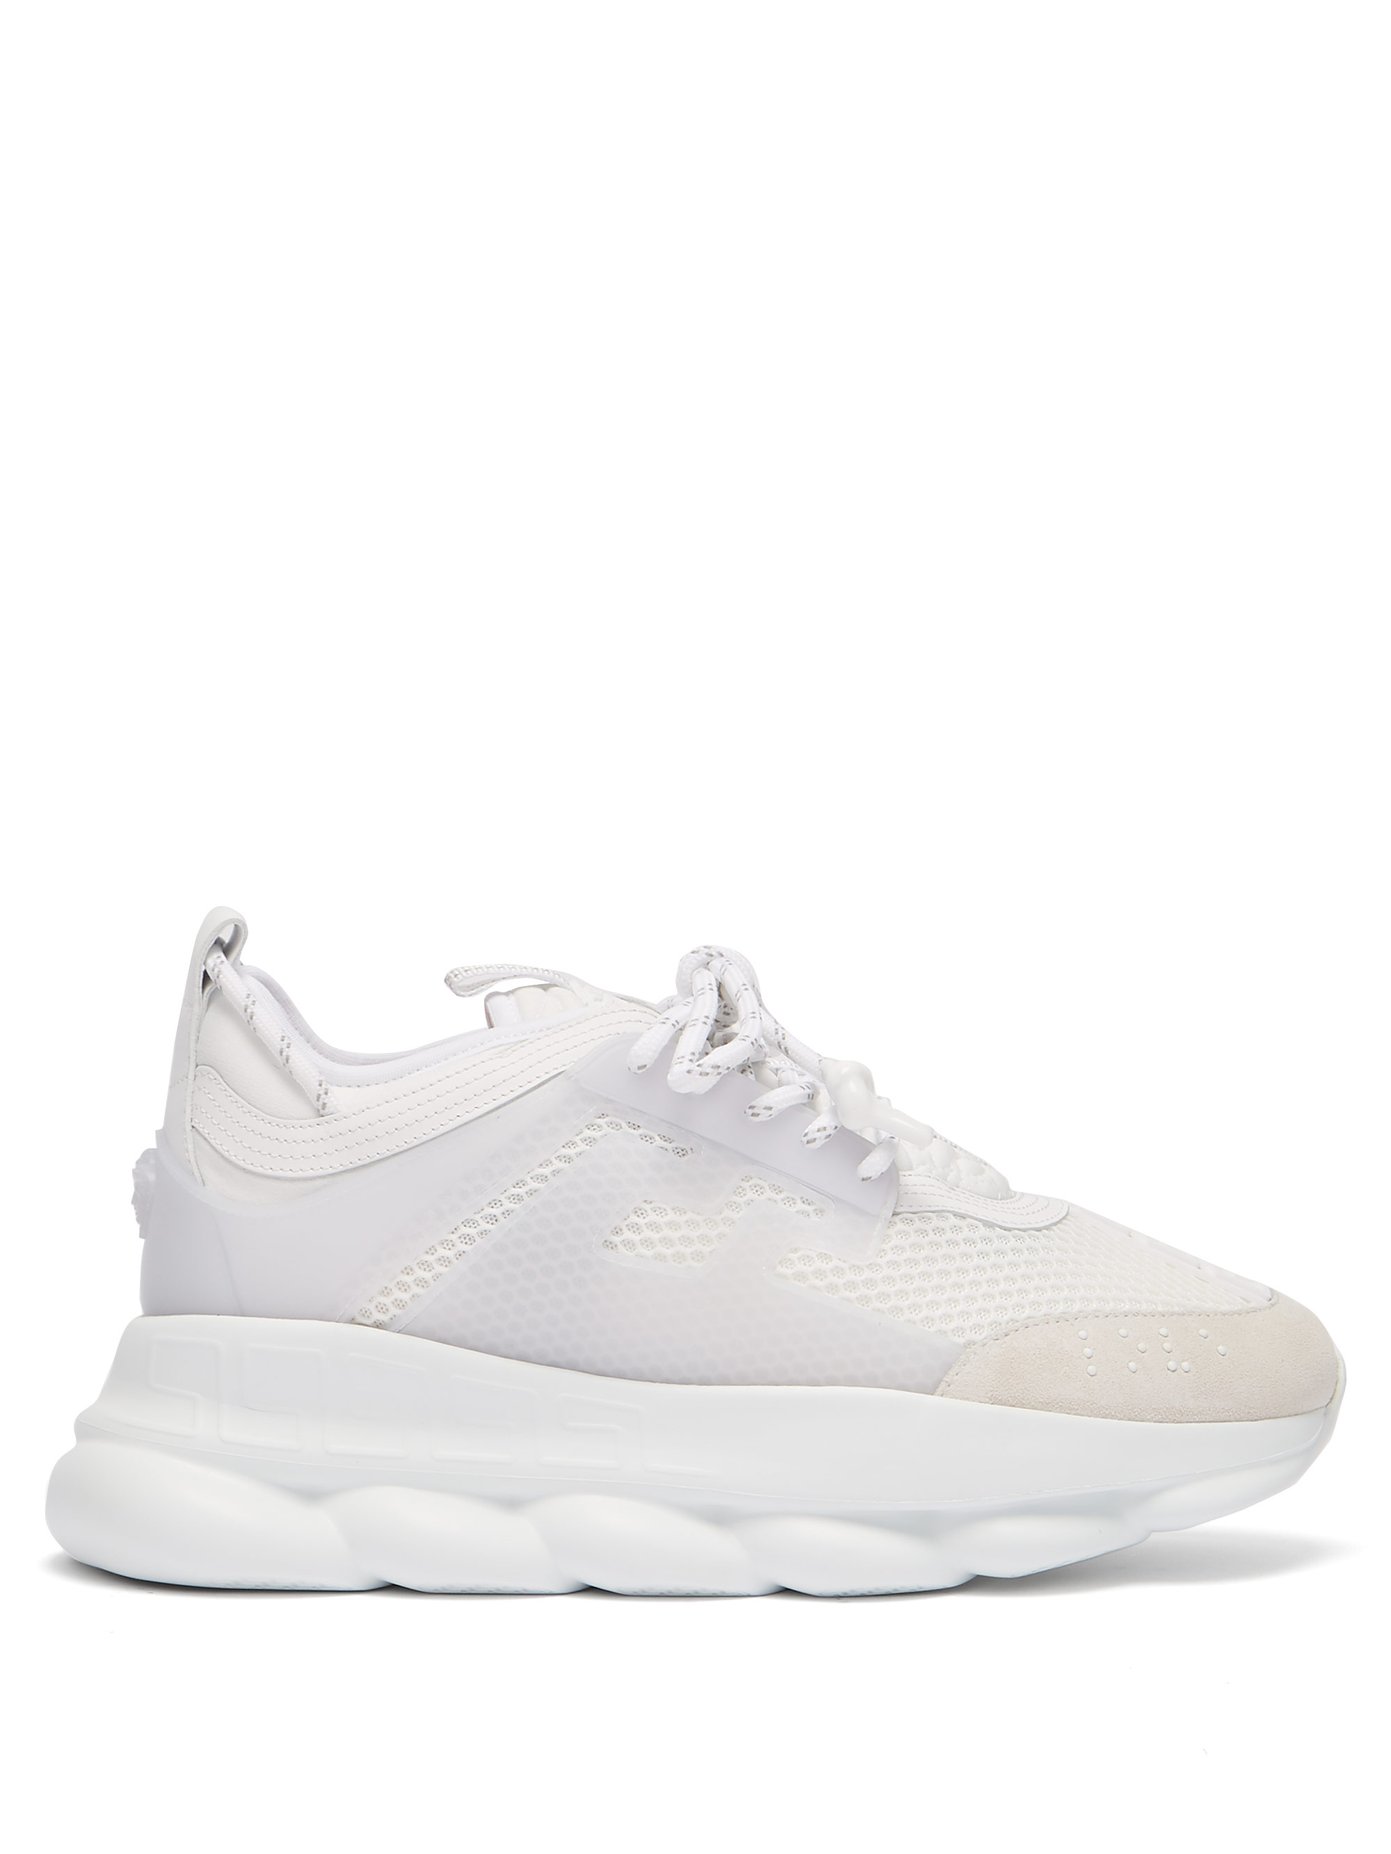 versace chain reaction trainers sale